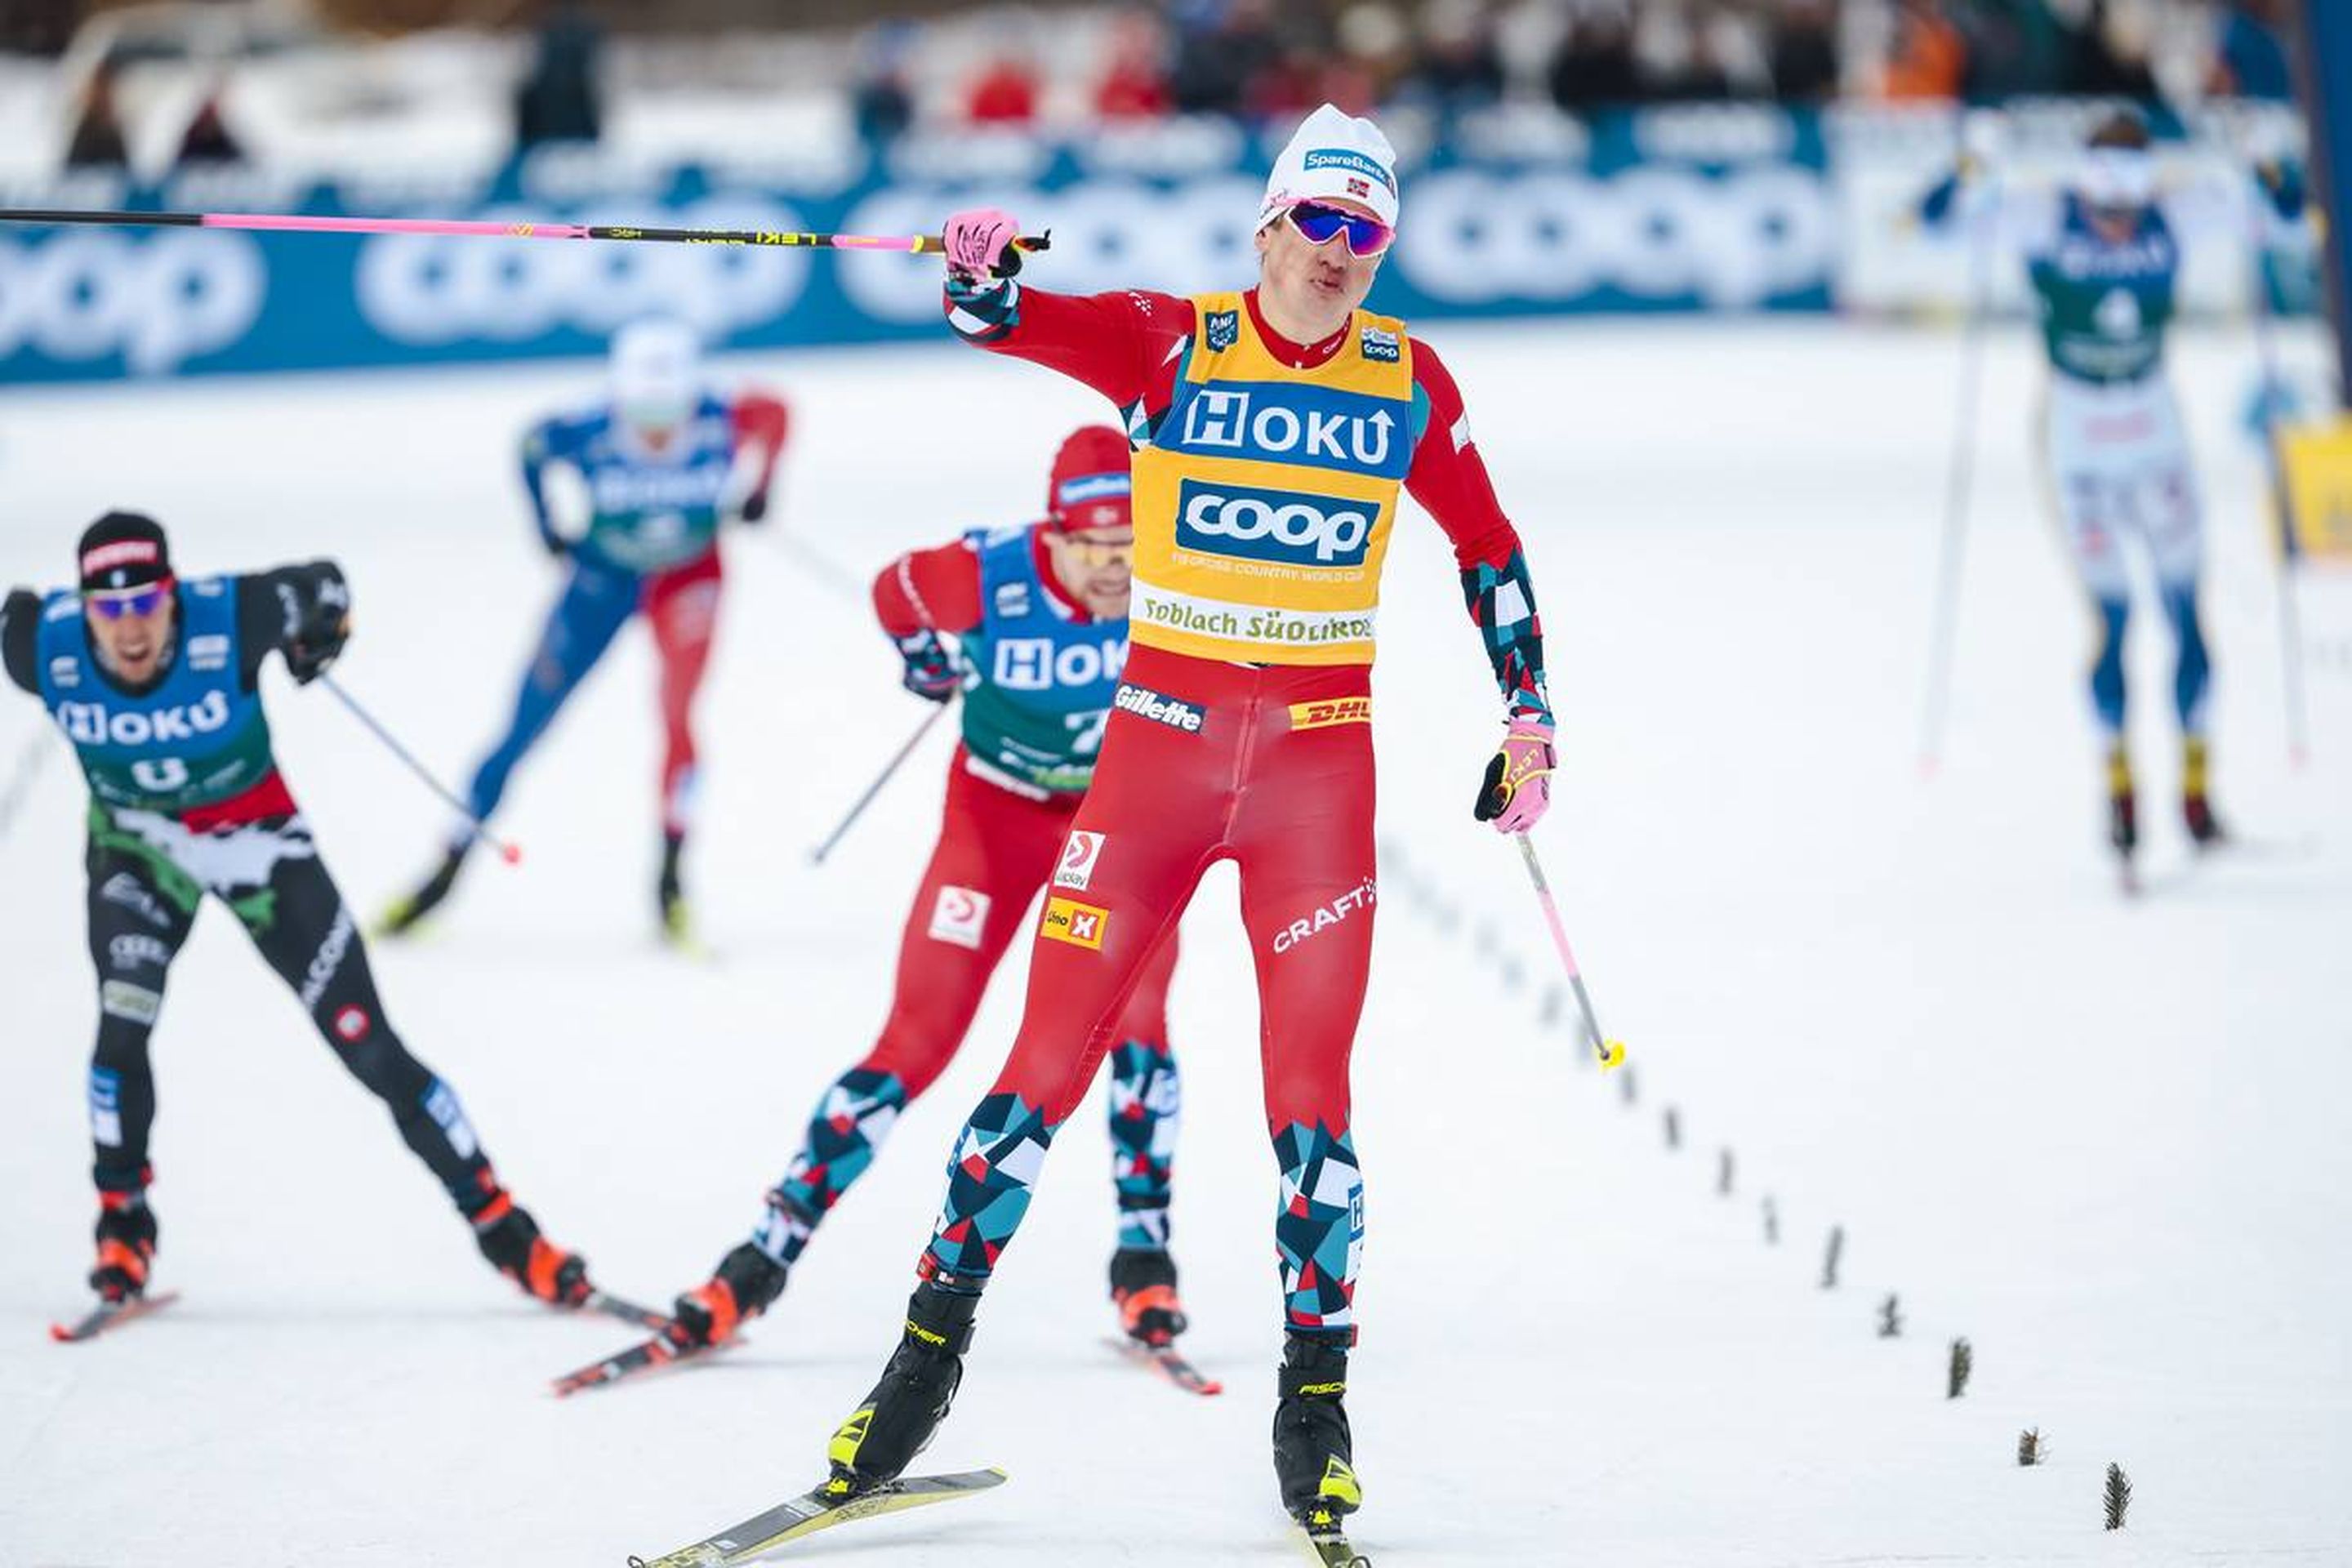 A familiar sight: Norway's Johannes Hoesflot Klaebo celebrates his sprint win before crossing the line to claim his 14th victory this season: @Nordic Focus.